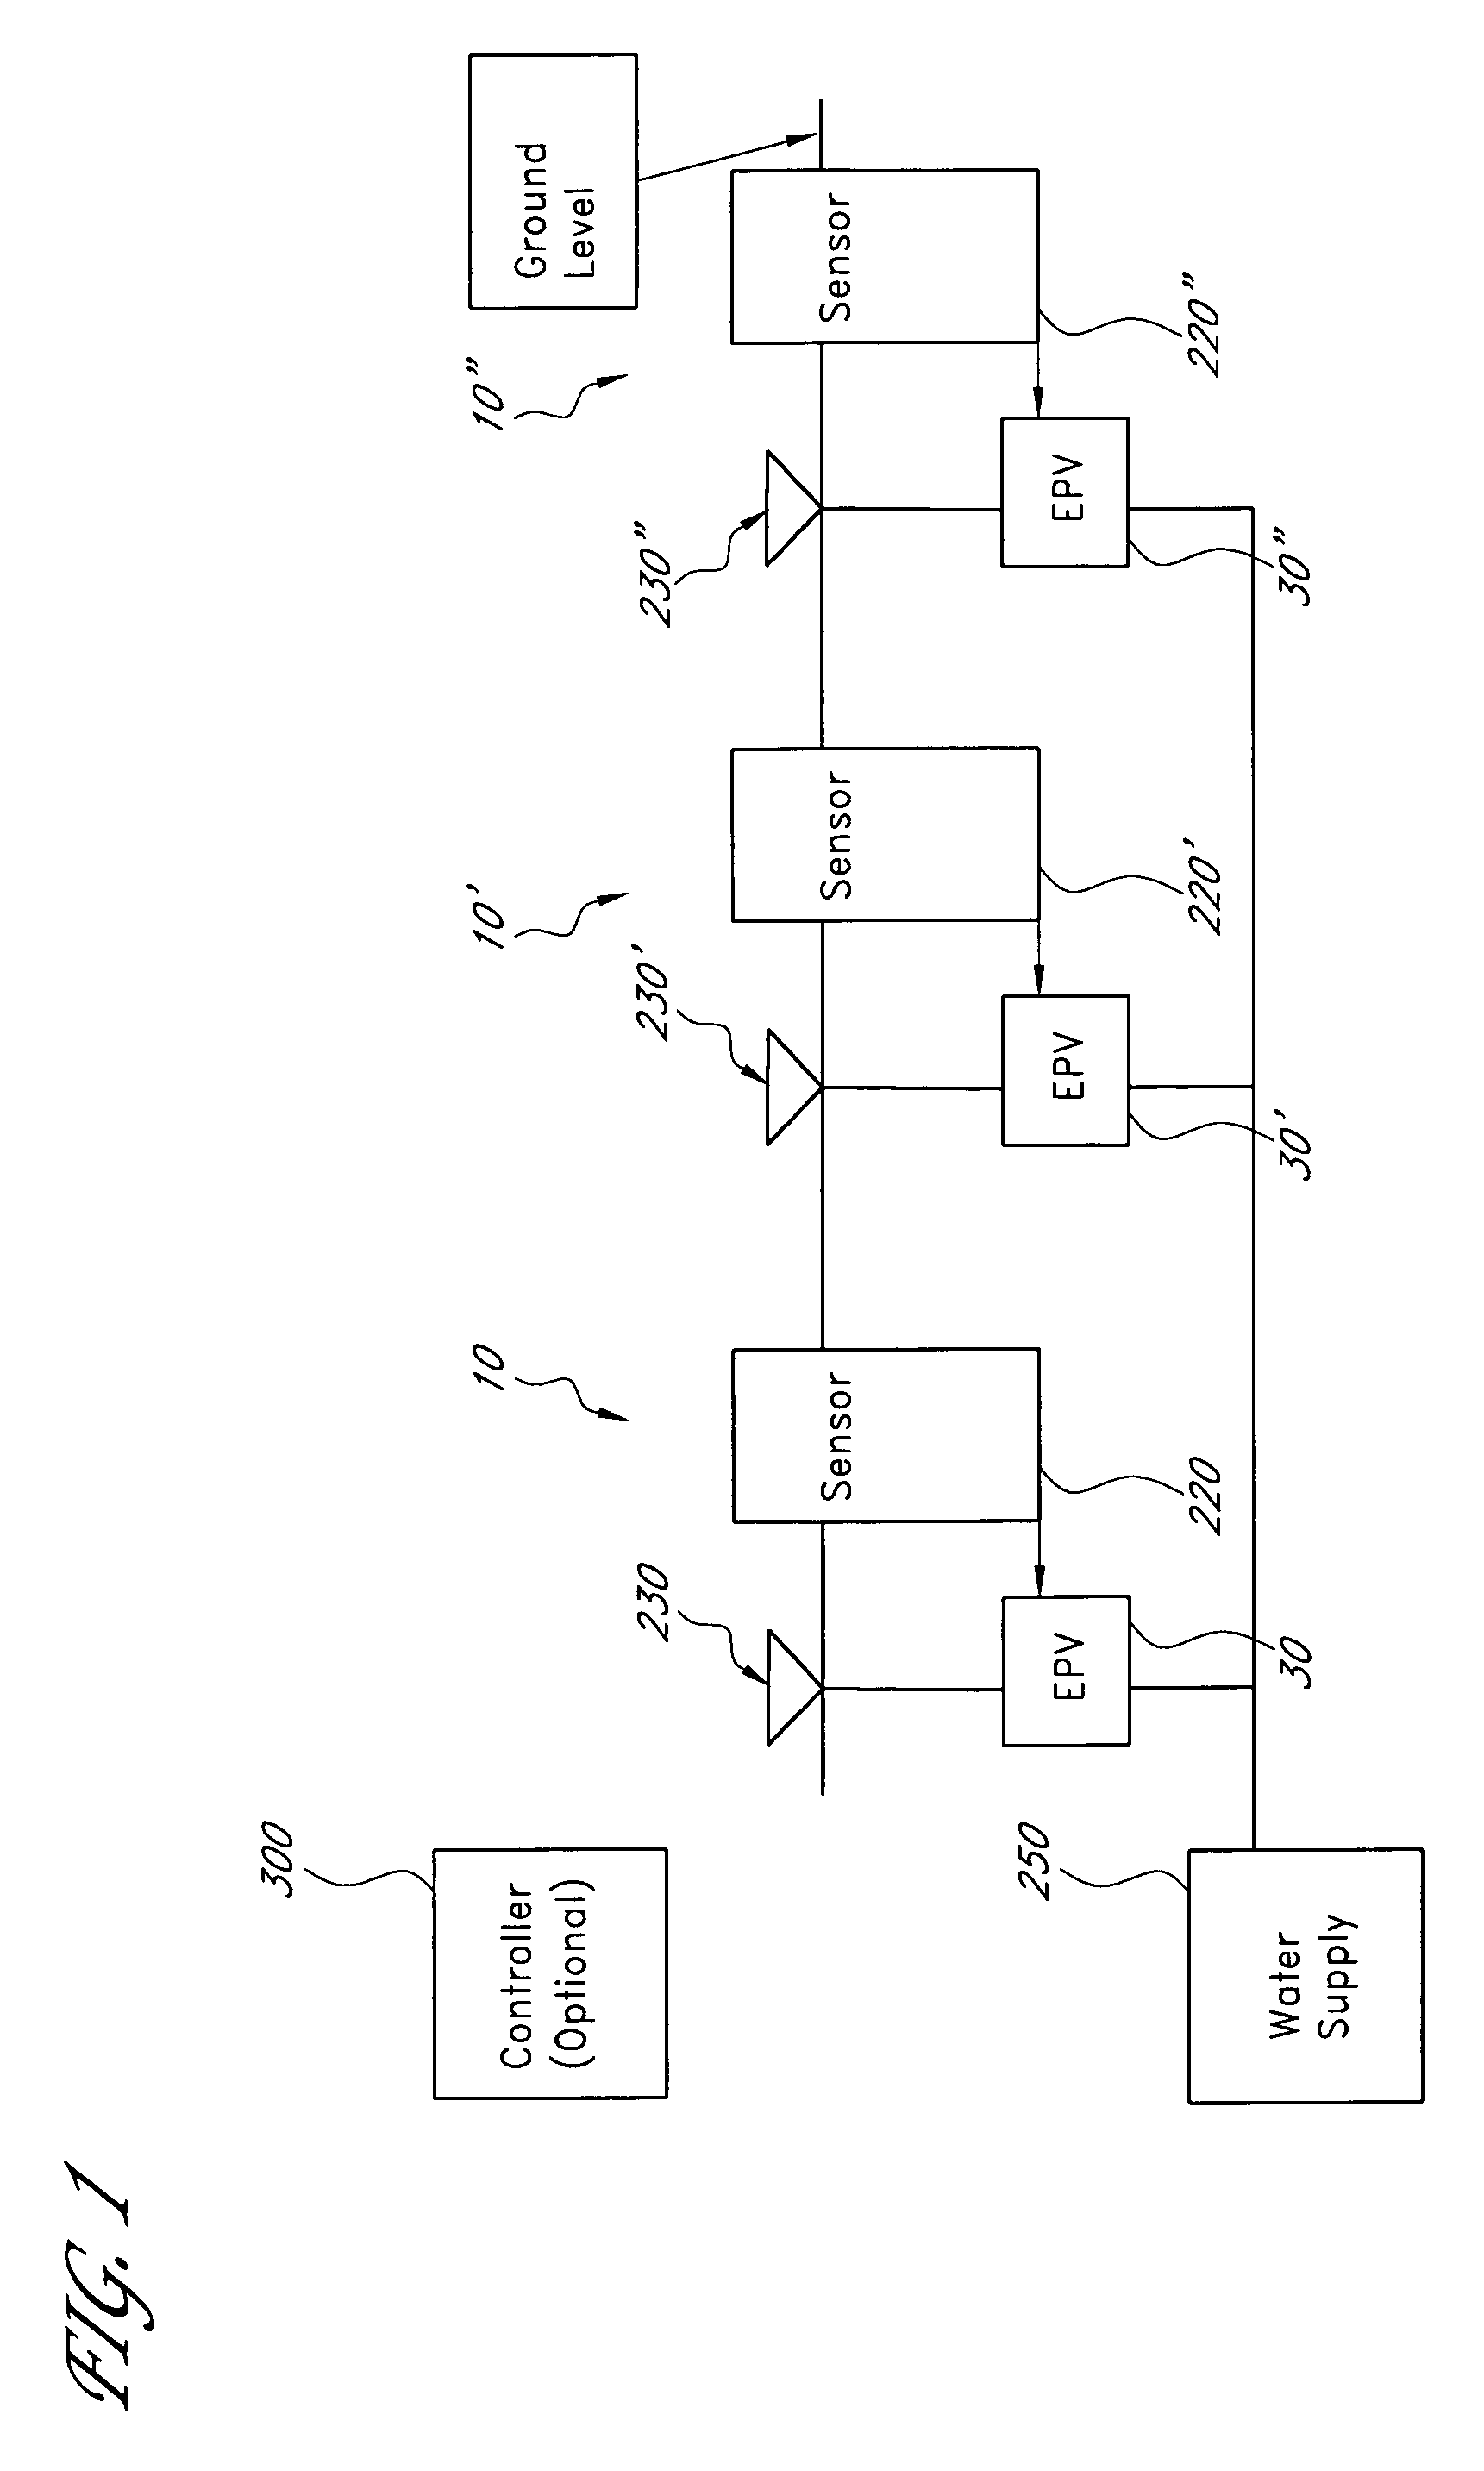 Low power system for wireless monitoring of an environment and irrigation control